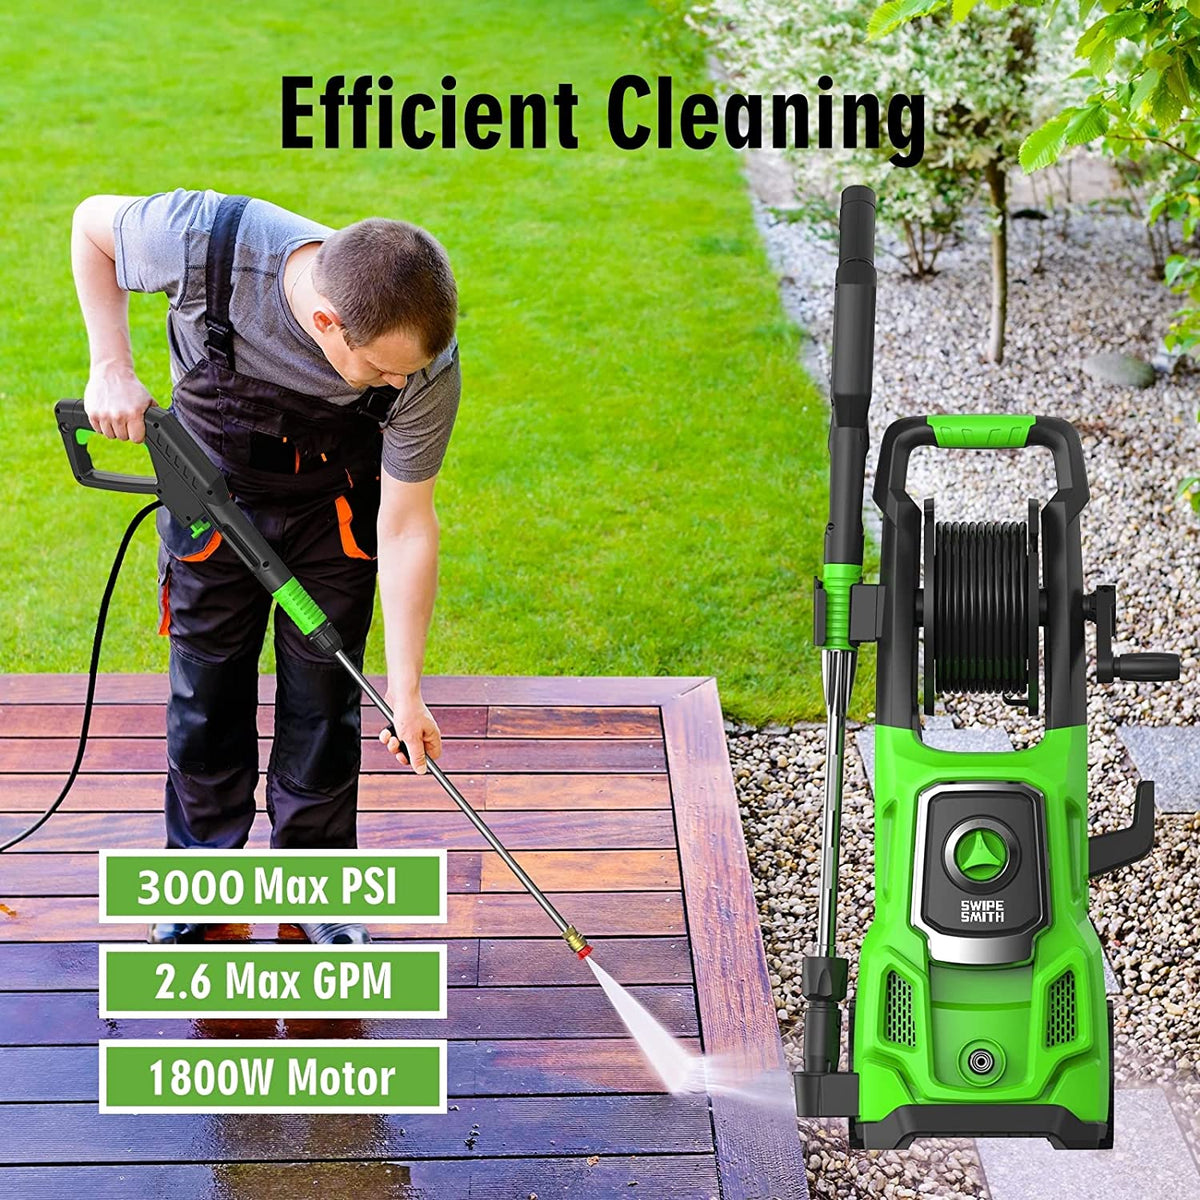 Electric Pressure Washer, SWIPESMITH 3000 Max PSI, 2.6 GPM Power Washer Machine with Hose Reel